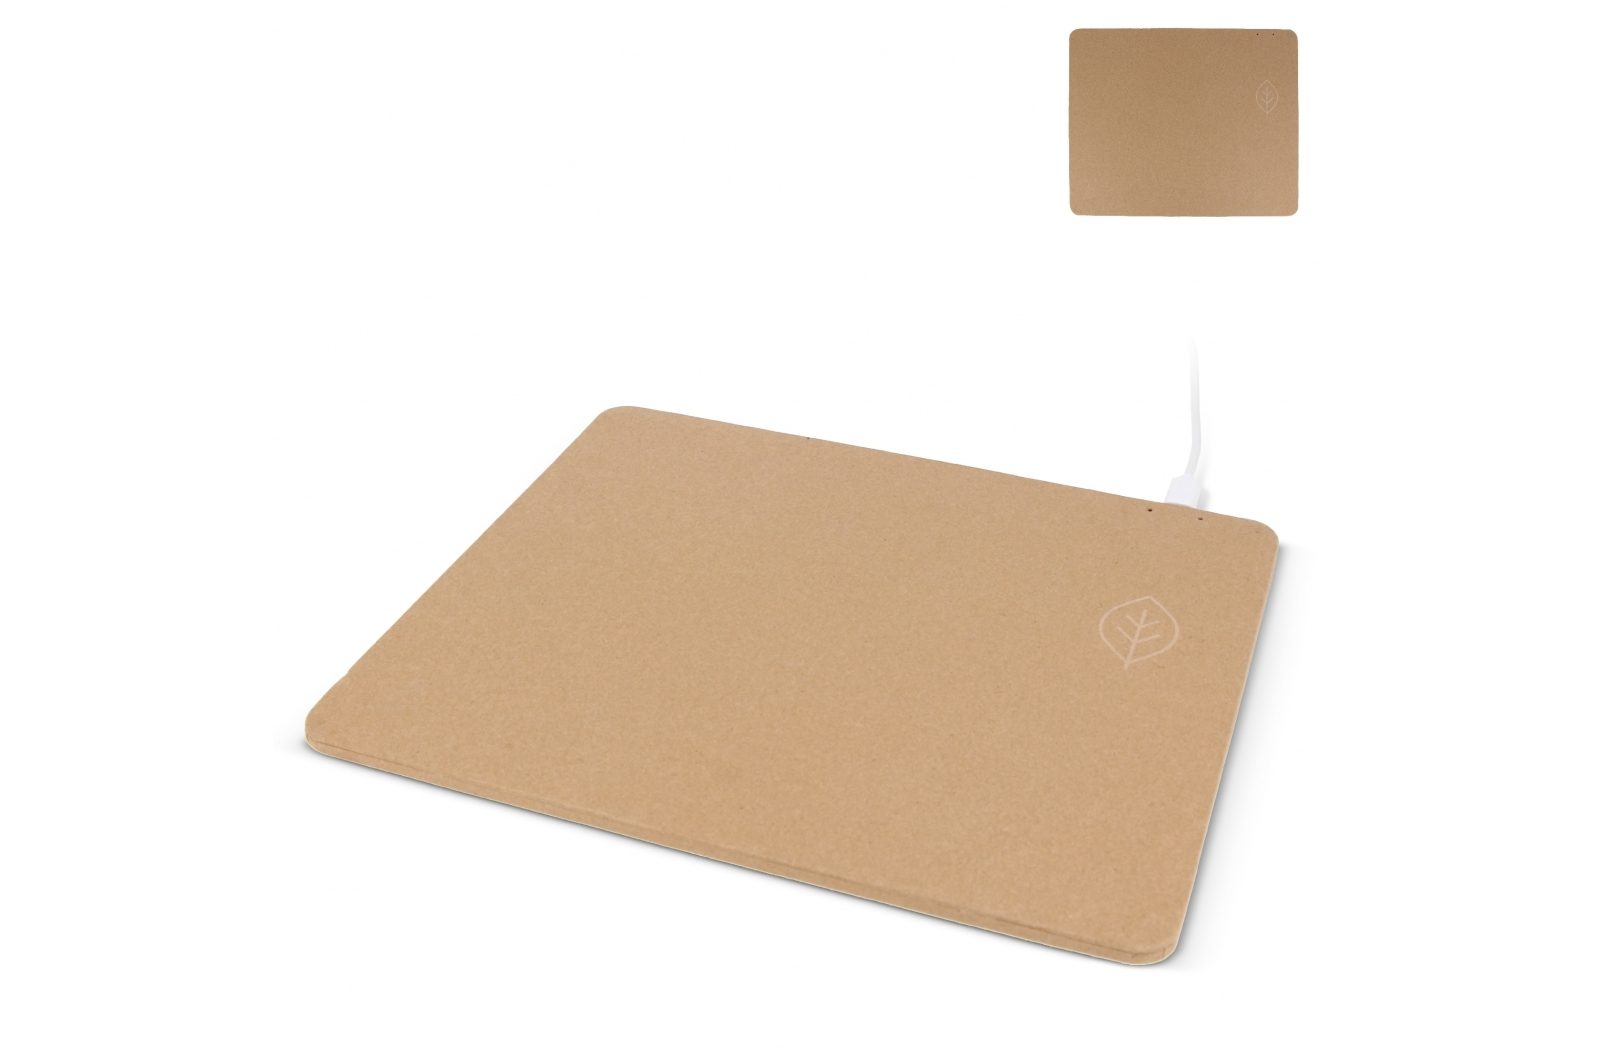 A mousepad made from recycled paper that comes with a wireless charger - Malmesbury